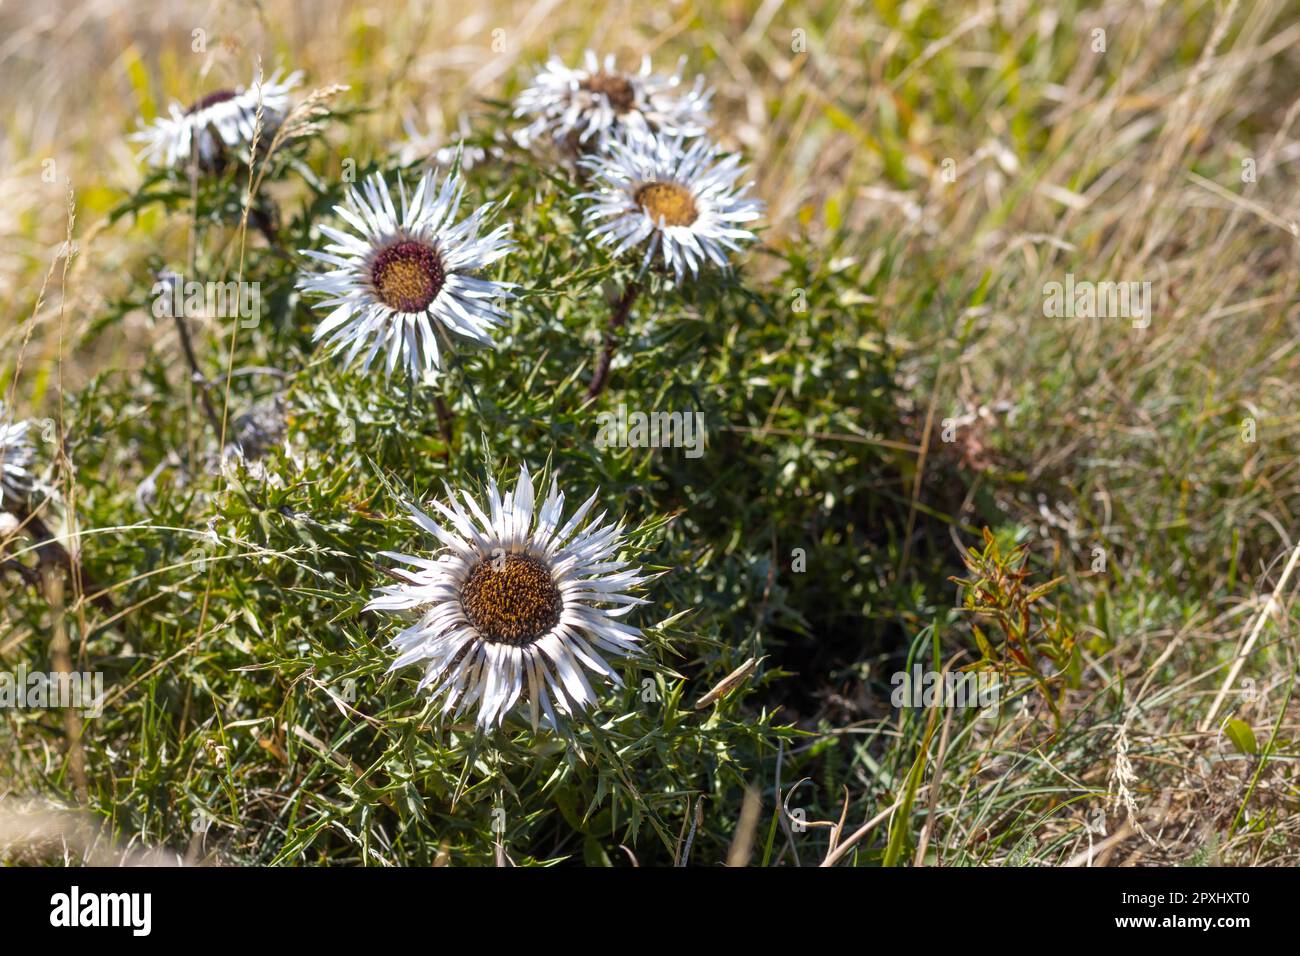 Carlina acaulis, carline thistle, silver thistle, european endemic flower plant, Asteraceae family, Appennino, Parma Italy. High quality photo Stock Photo